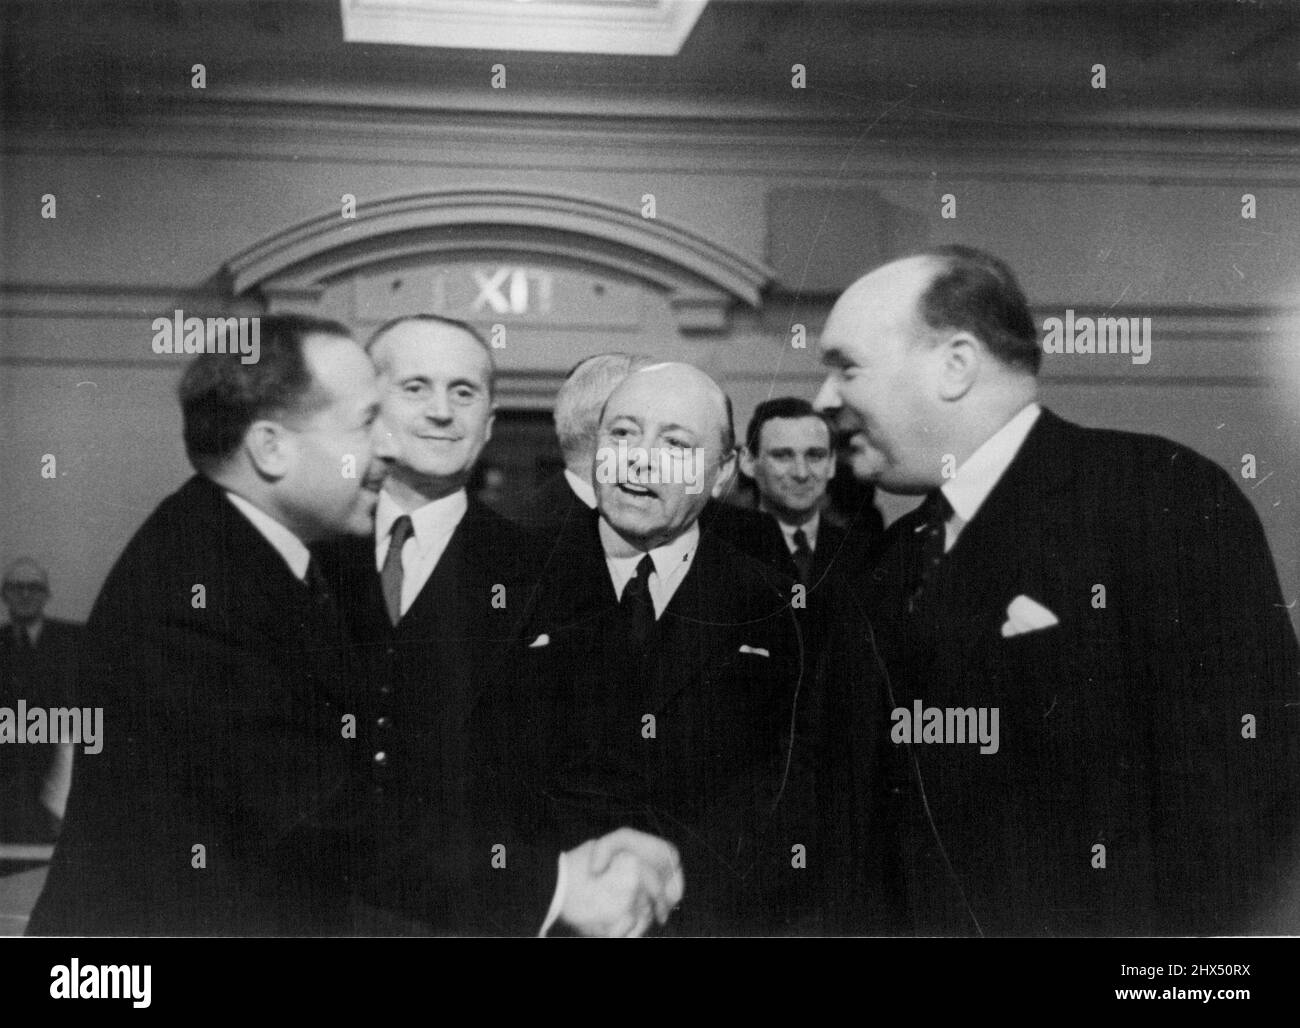 United Nations Assembly, London, 1946 -- M. Spaak, the Belgian Foreign Minister, was elected President of the Assembly. Here he is being congratulated by a colleague. March 24, 1948. (Photo by Pictorial Press). Stock Photo